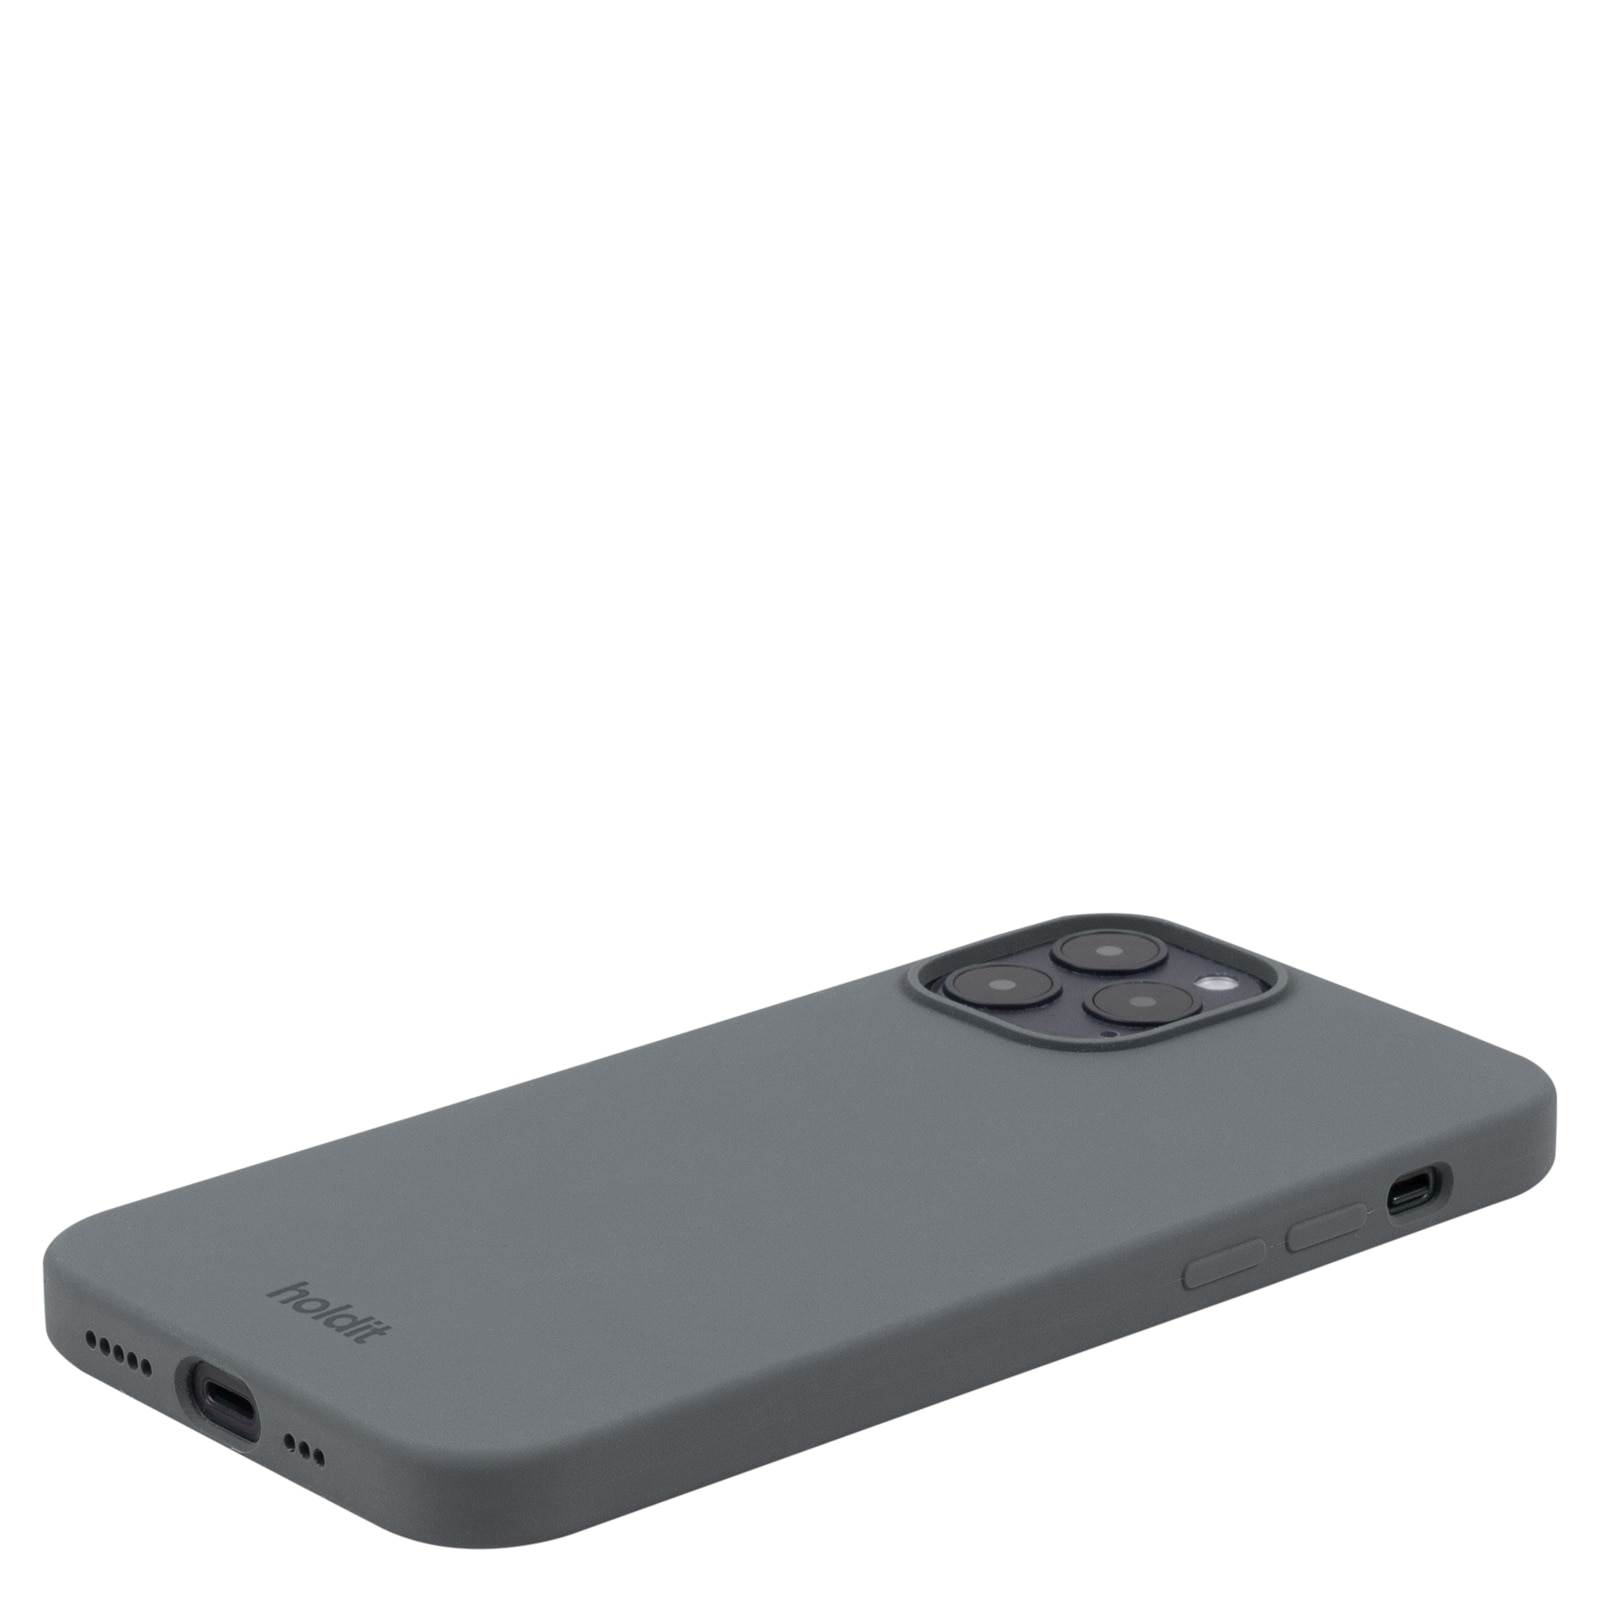 iPhone 12/12 Pro Silicone Case, Space Gray